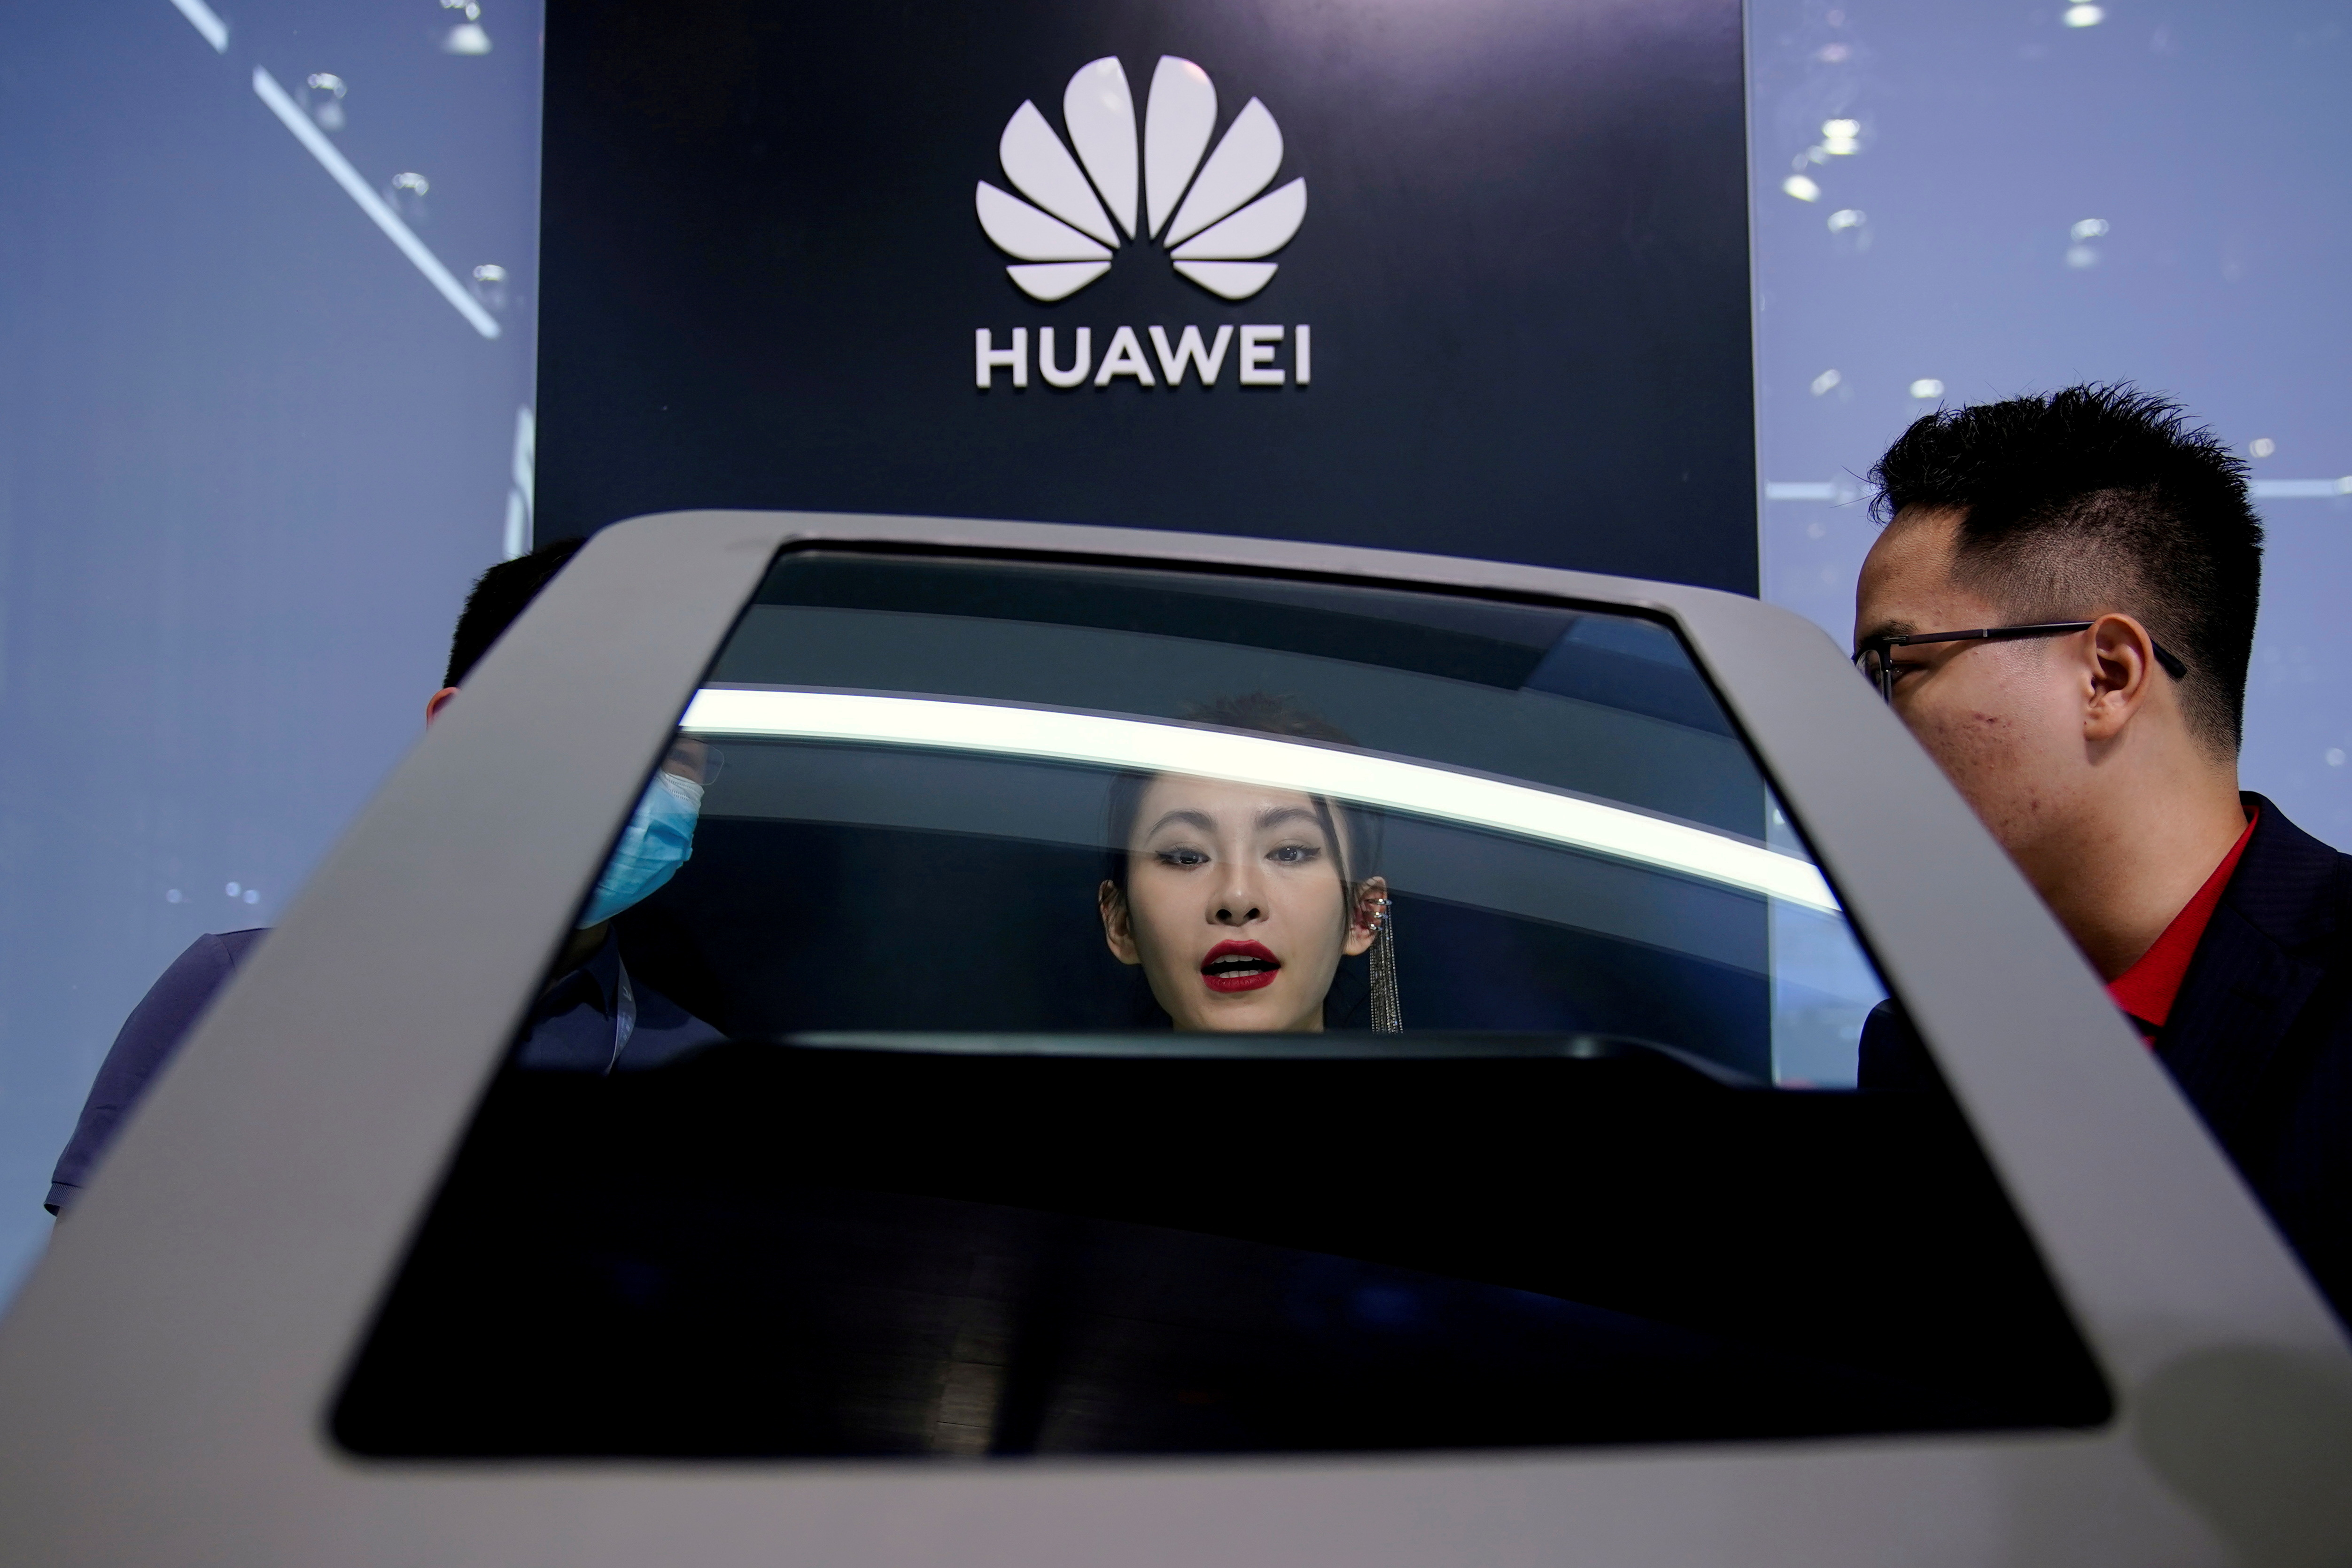 People check a display near a Huawei logo during a media day for the Auto Shanghai show in Shanghai, China April 19, 2021. REUTERS/Aly Song/File Photo